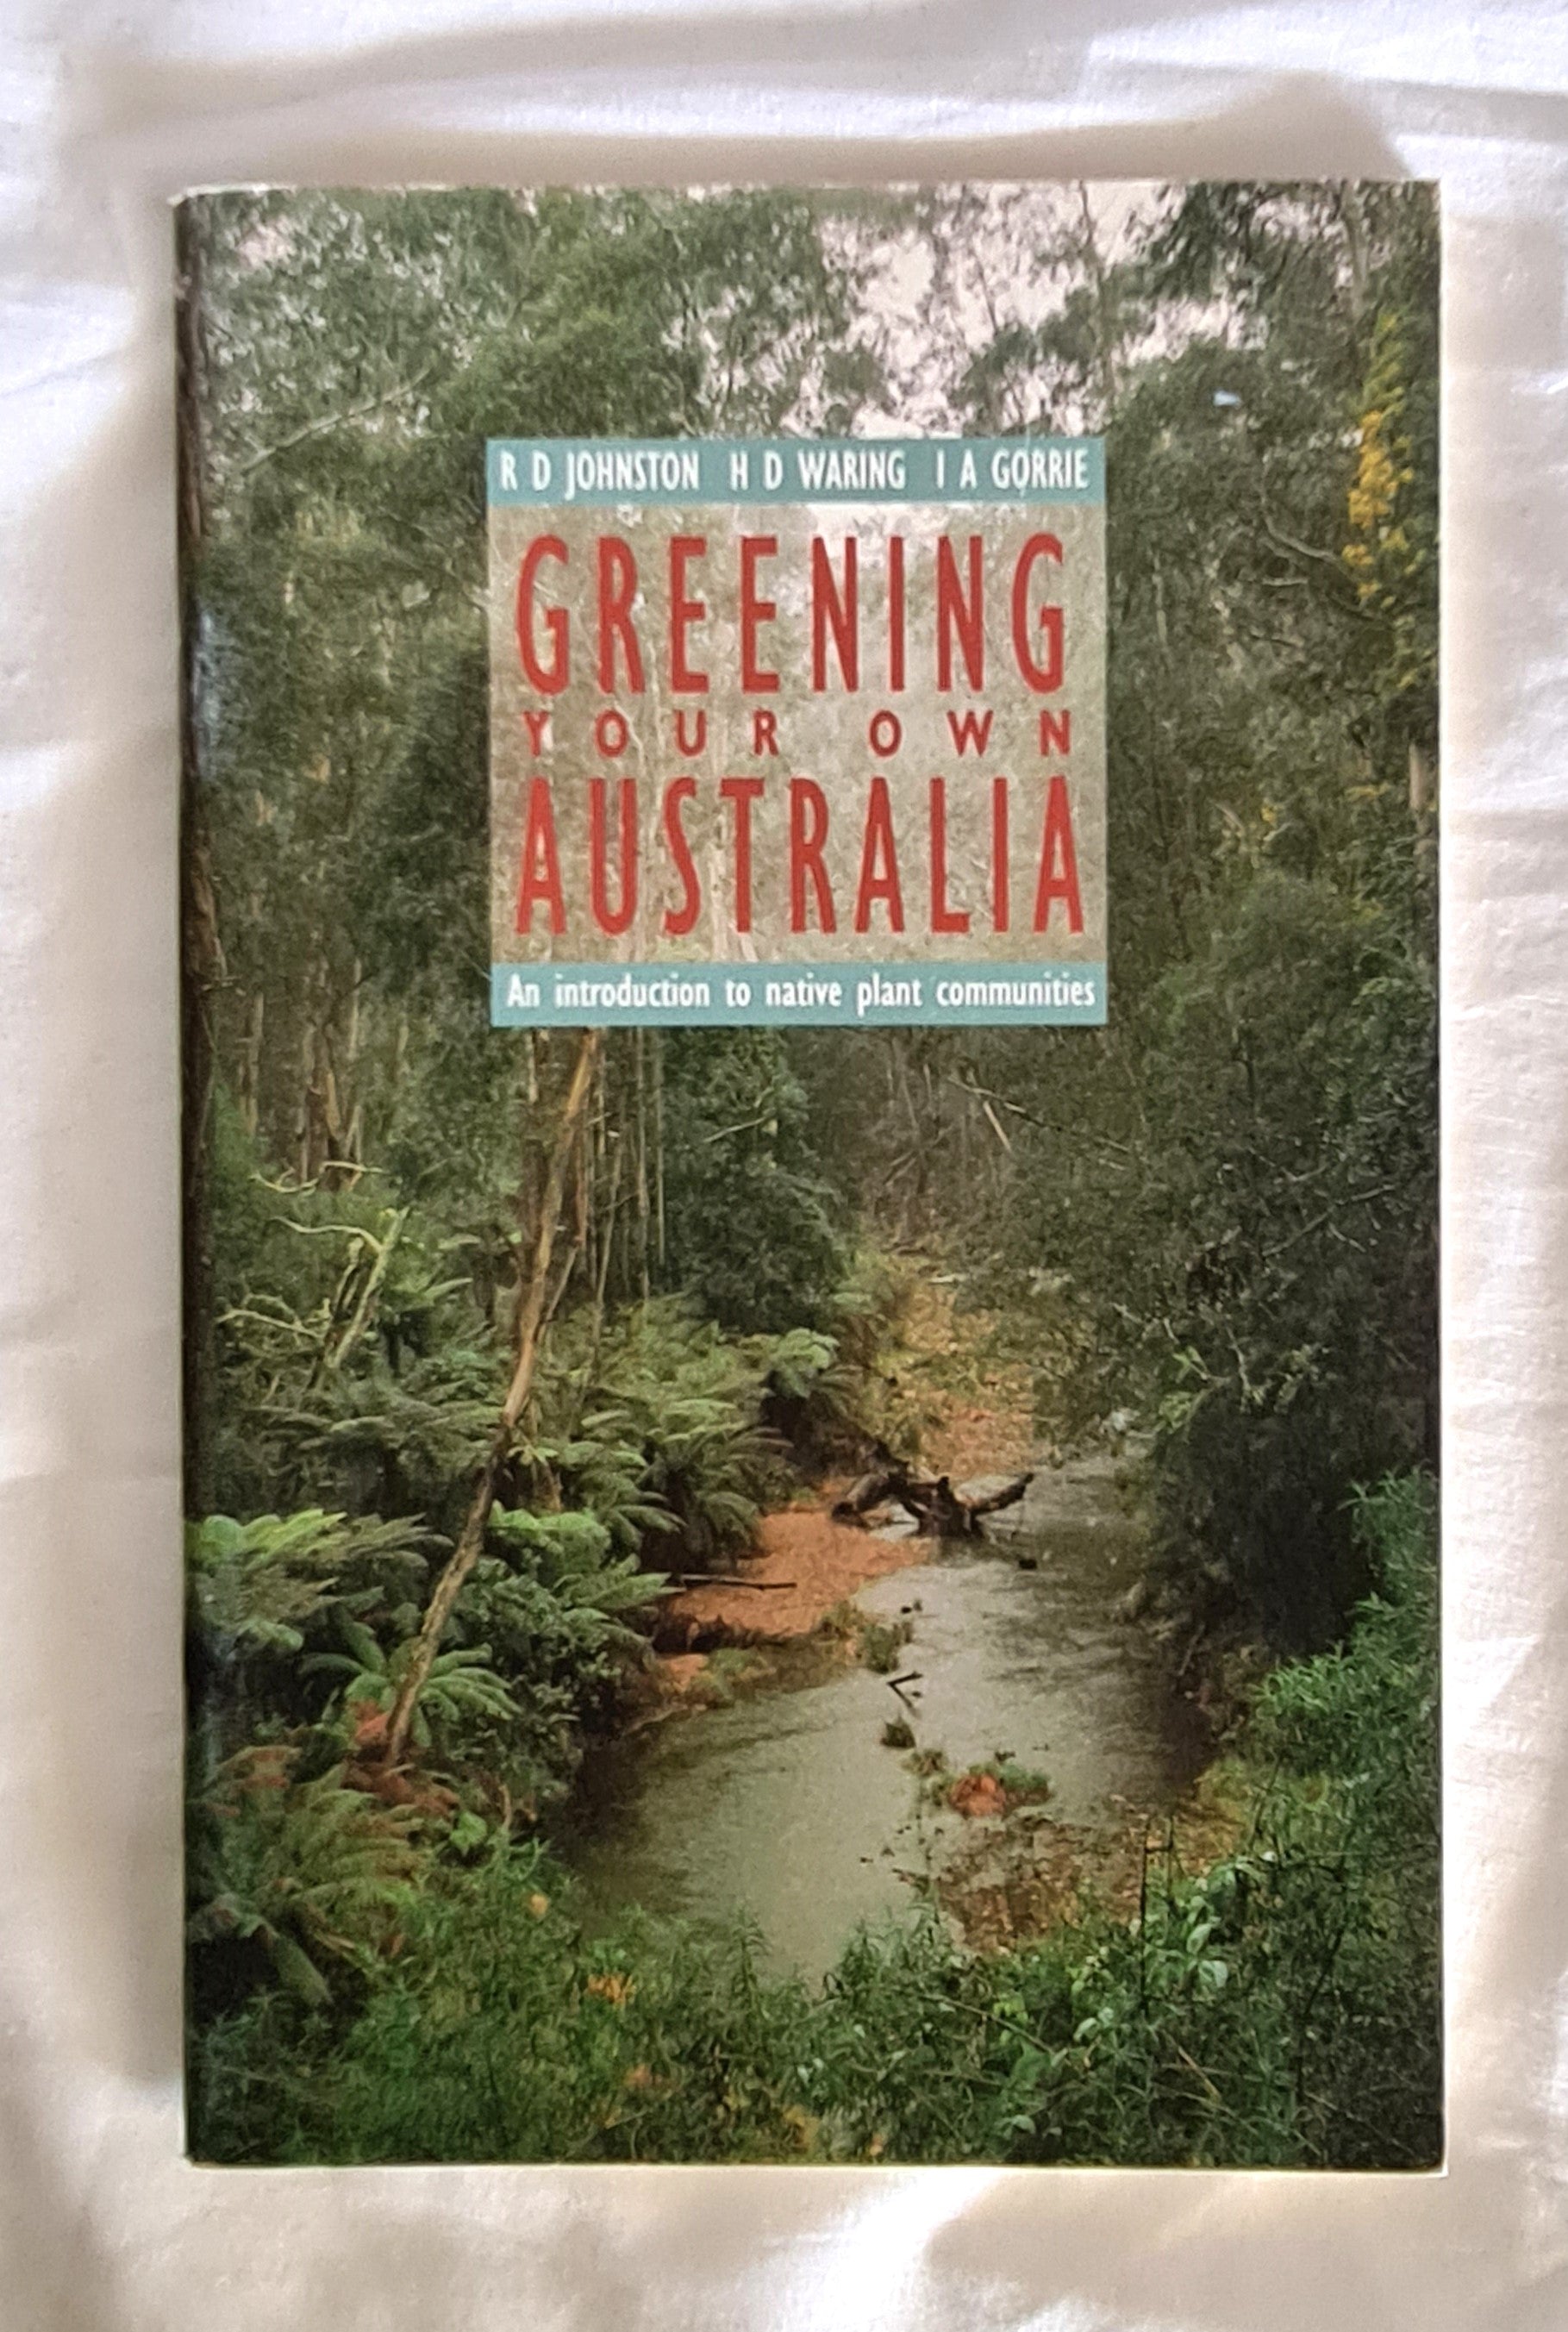 Greening Your Own Australia  An introduction to native plant communities  by R. D. Johnston, H. D. Waring and I. A. Gorrie